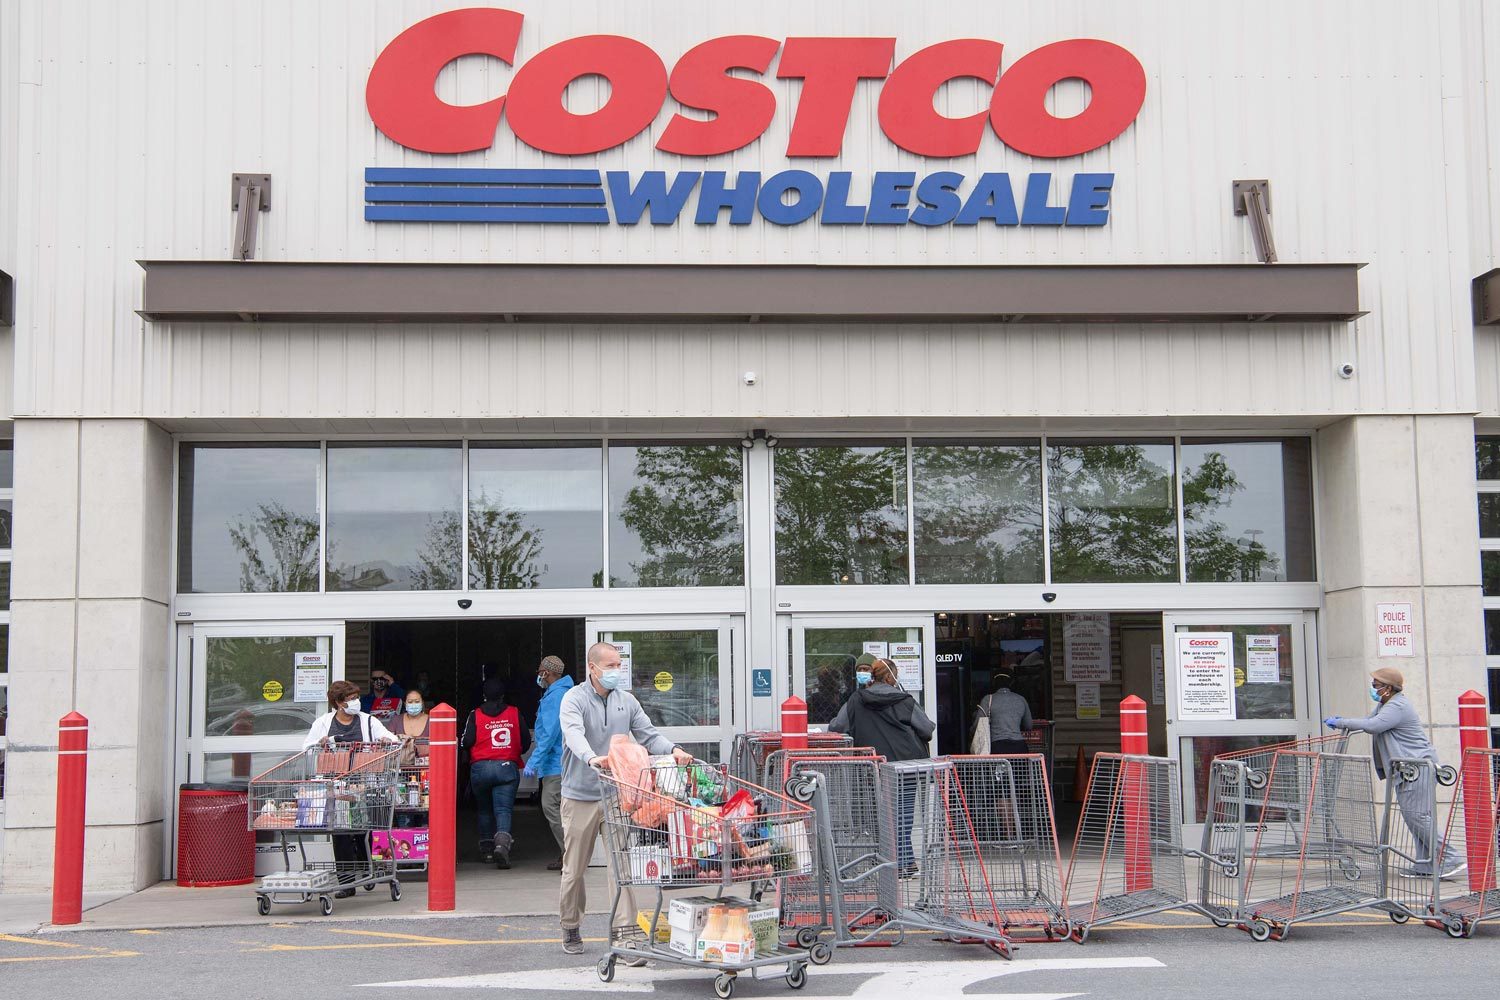 Is Costco Travel Worth It? 5 Big Reasons Why It Might Not Be Worth